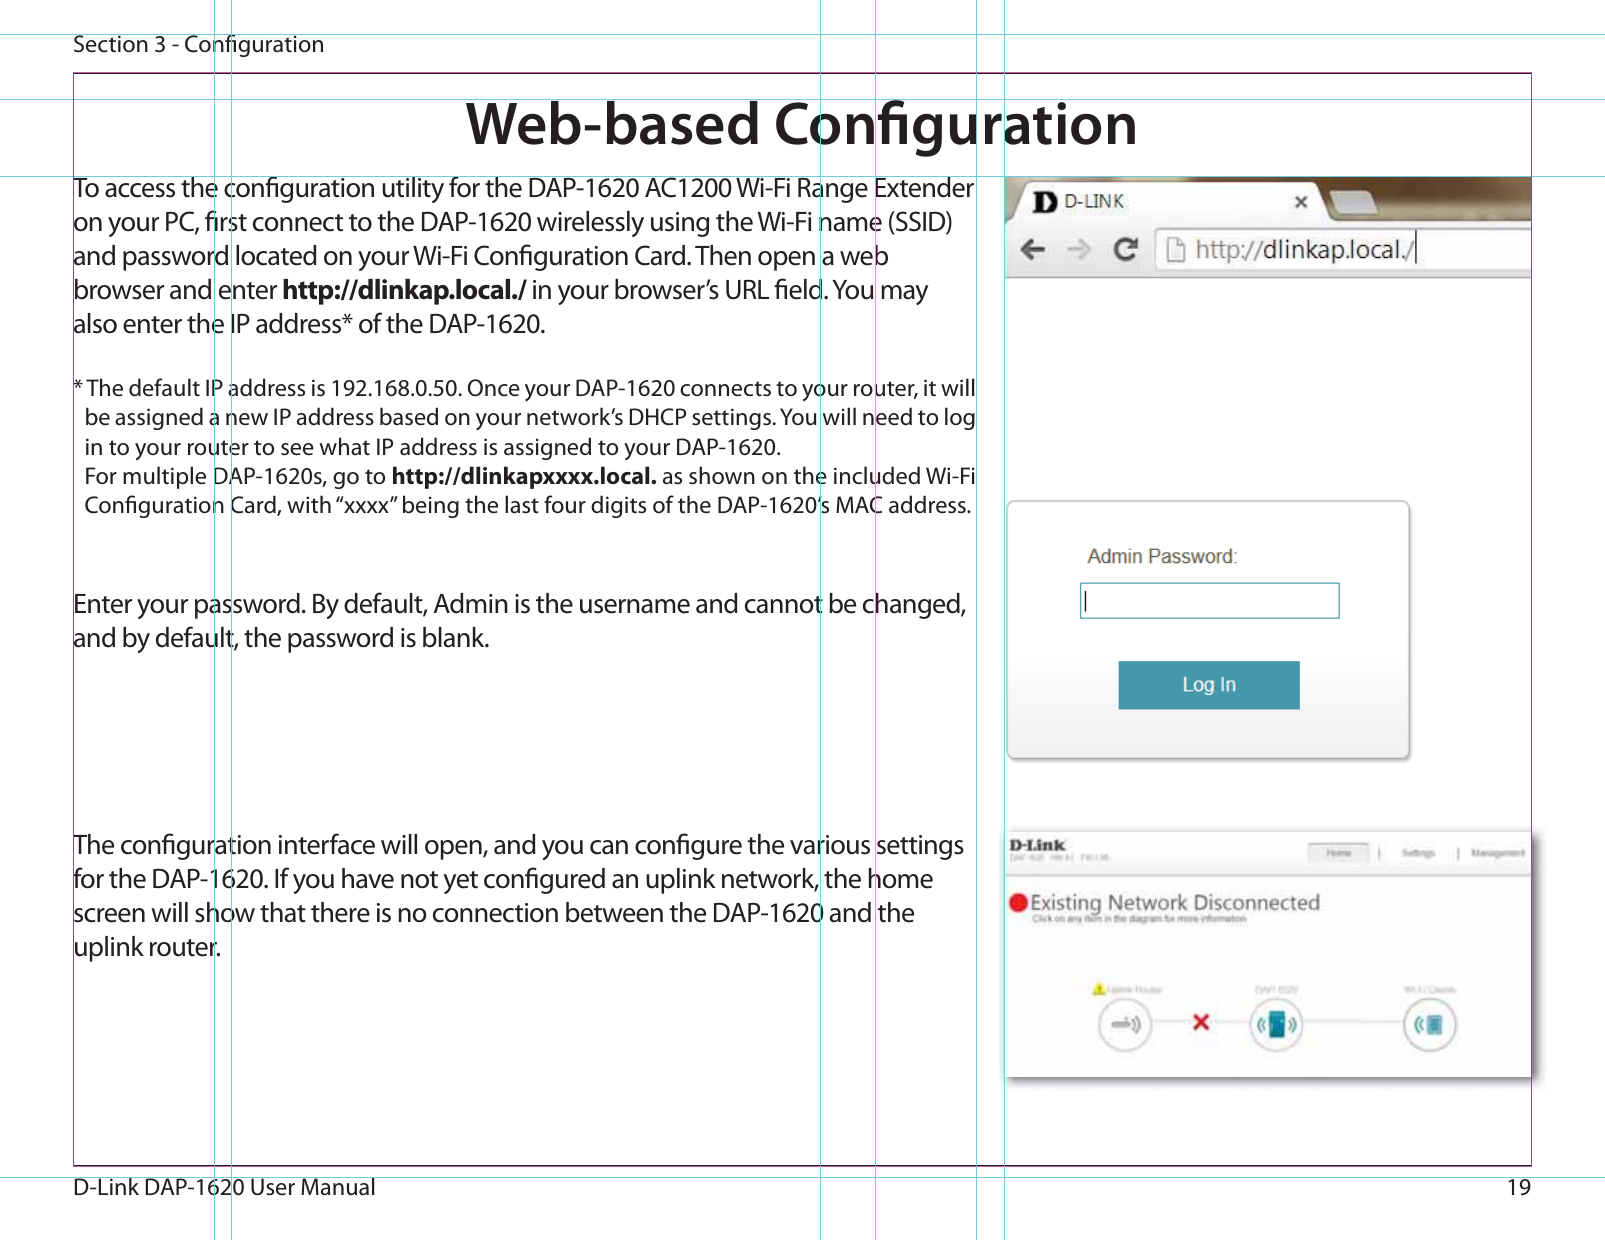 19D-Link DAP-1620 User ManualSection 3 - CongurationWeb-based CongurationEnter your password. By default, Admin is the username and cannot be changed, and by default, the password is blank.To access the conguration utility for the DAP-1620 AC1200 Wi-Fi Range Extender on your PC, rst connect to the DAP-1620 wirelessly using the Wi-Fi name (SSID) and password located on your Wi-Fi Conguration Card. Then open a web browser and enter http://dlinkap.local./ in your browser’s URL eld. You may also enter the IP address* of the DAP-1620. * The default IP address is 192.168.0.50. Once your DAP-1620 connects to your router, it will be assigned a new IP address based on your network’s DHCP settings. You will need to log in to your router to see what IP address is assigned to your DAP-1620.For multiple DAP-1620s, go to http://dlinkapxxxx.local. as shown on the included Wi-Fi Conguration Card, with “xxxx” being the last four digits of the DAP-1620’s MAC address. The conguration interface will open, and you can congure the various settings for the DAP-1620. If you have not yet congured an uplink network, the home screen will show that there is no connection between the DAP-1620 and the uplink router. 